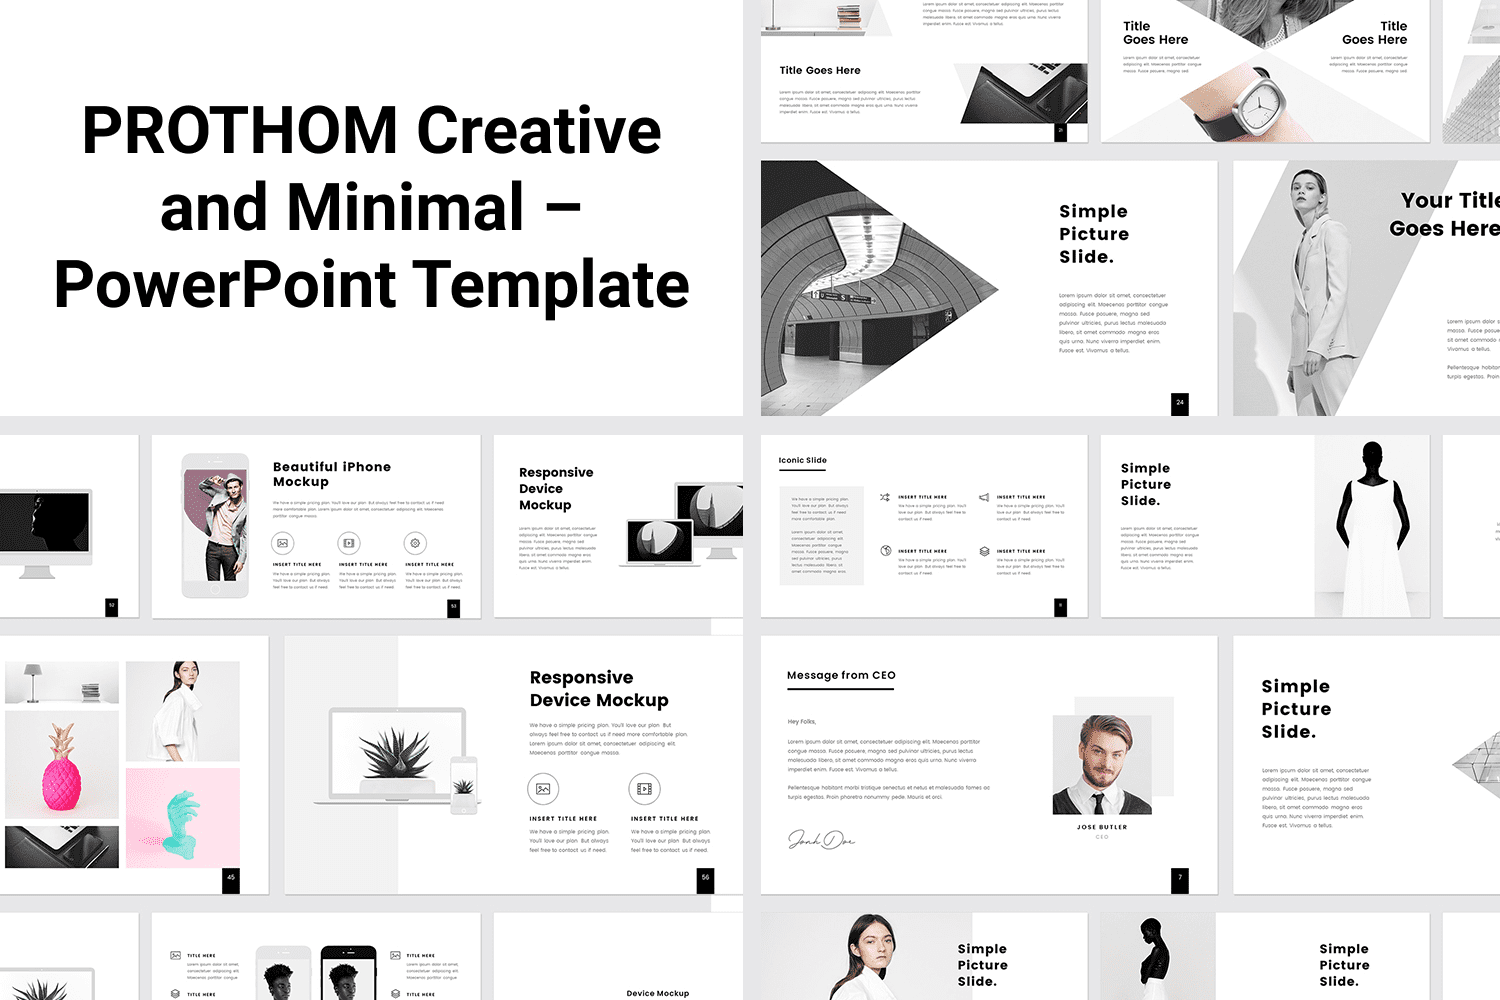 This is a minimal, clean, creative and modern template for anyone who wants to build an amazing and modern presentation of any genre.